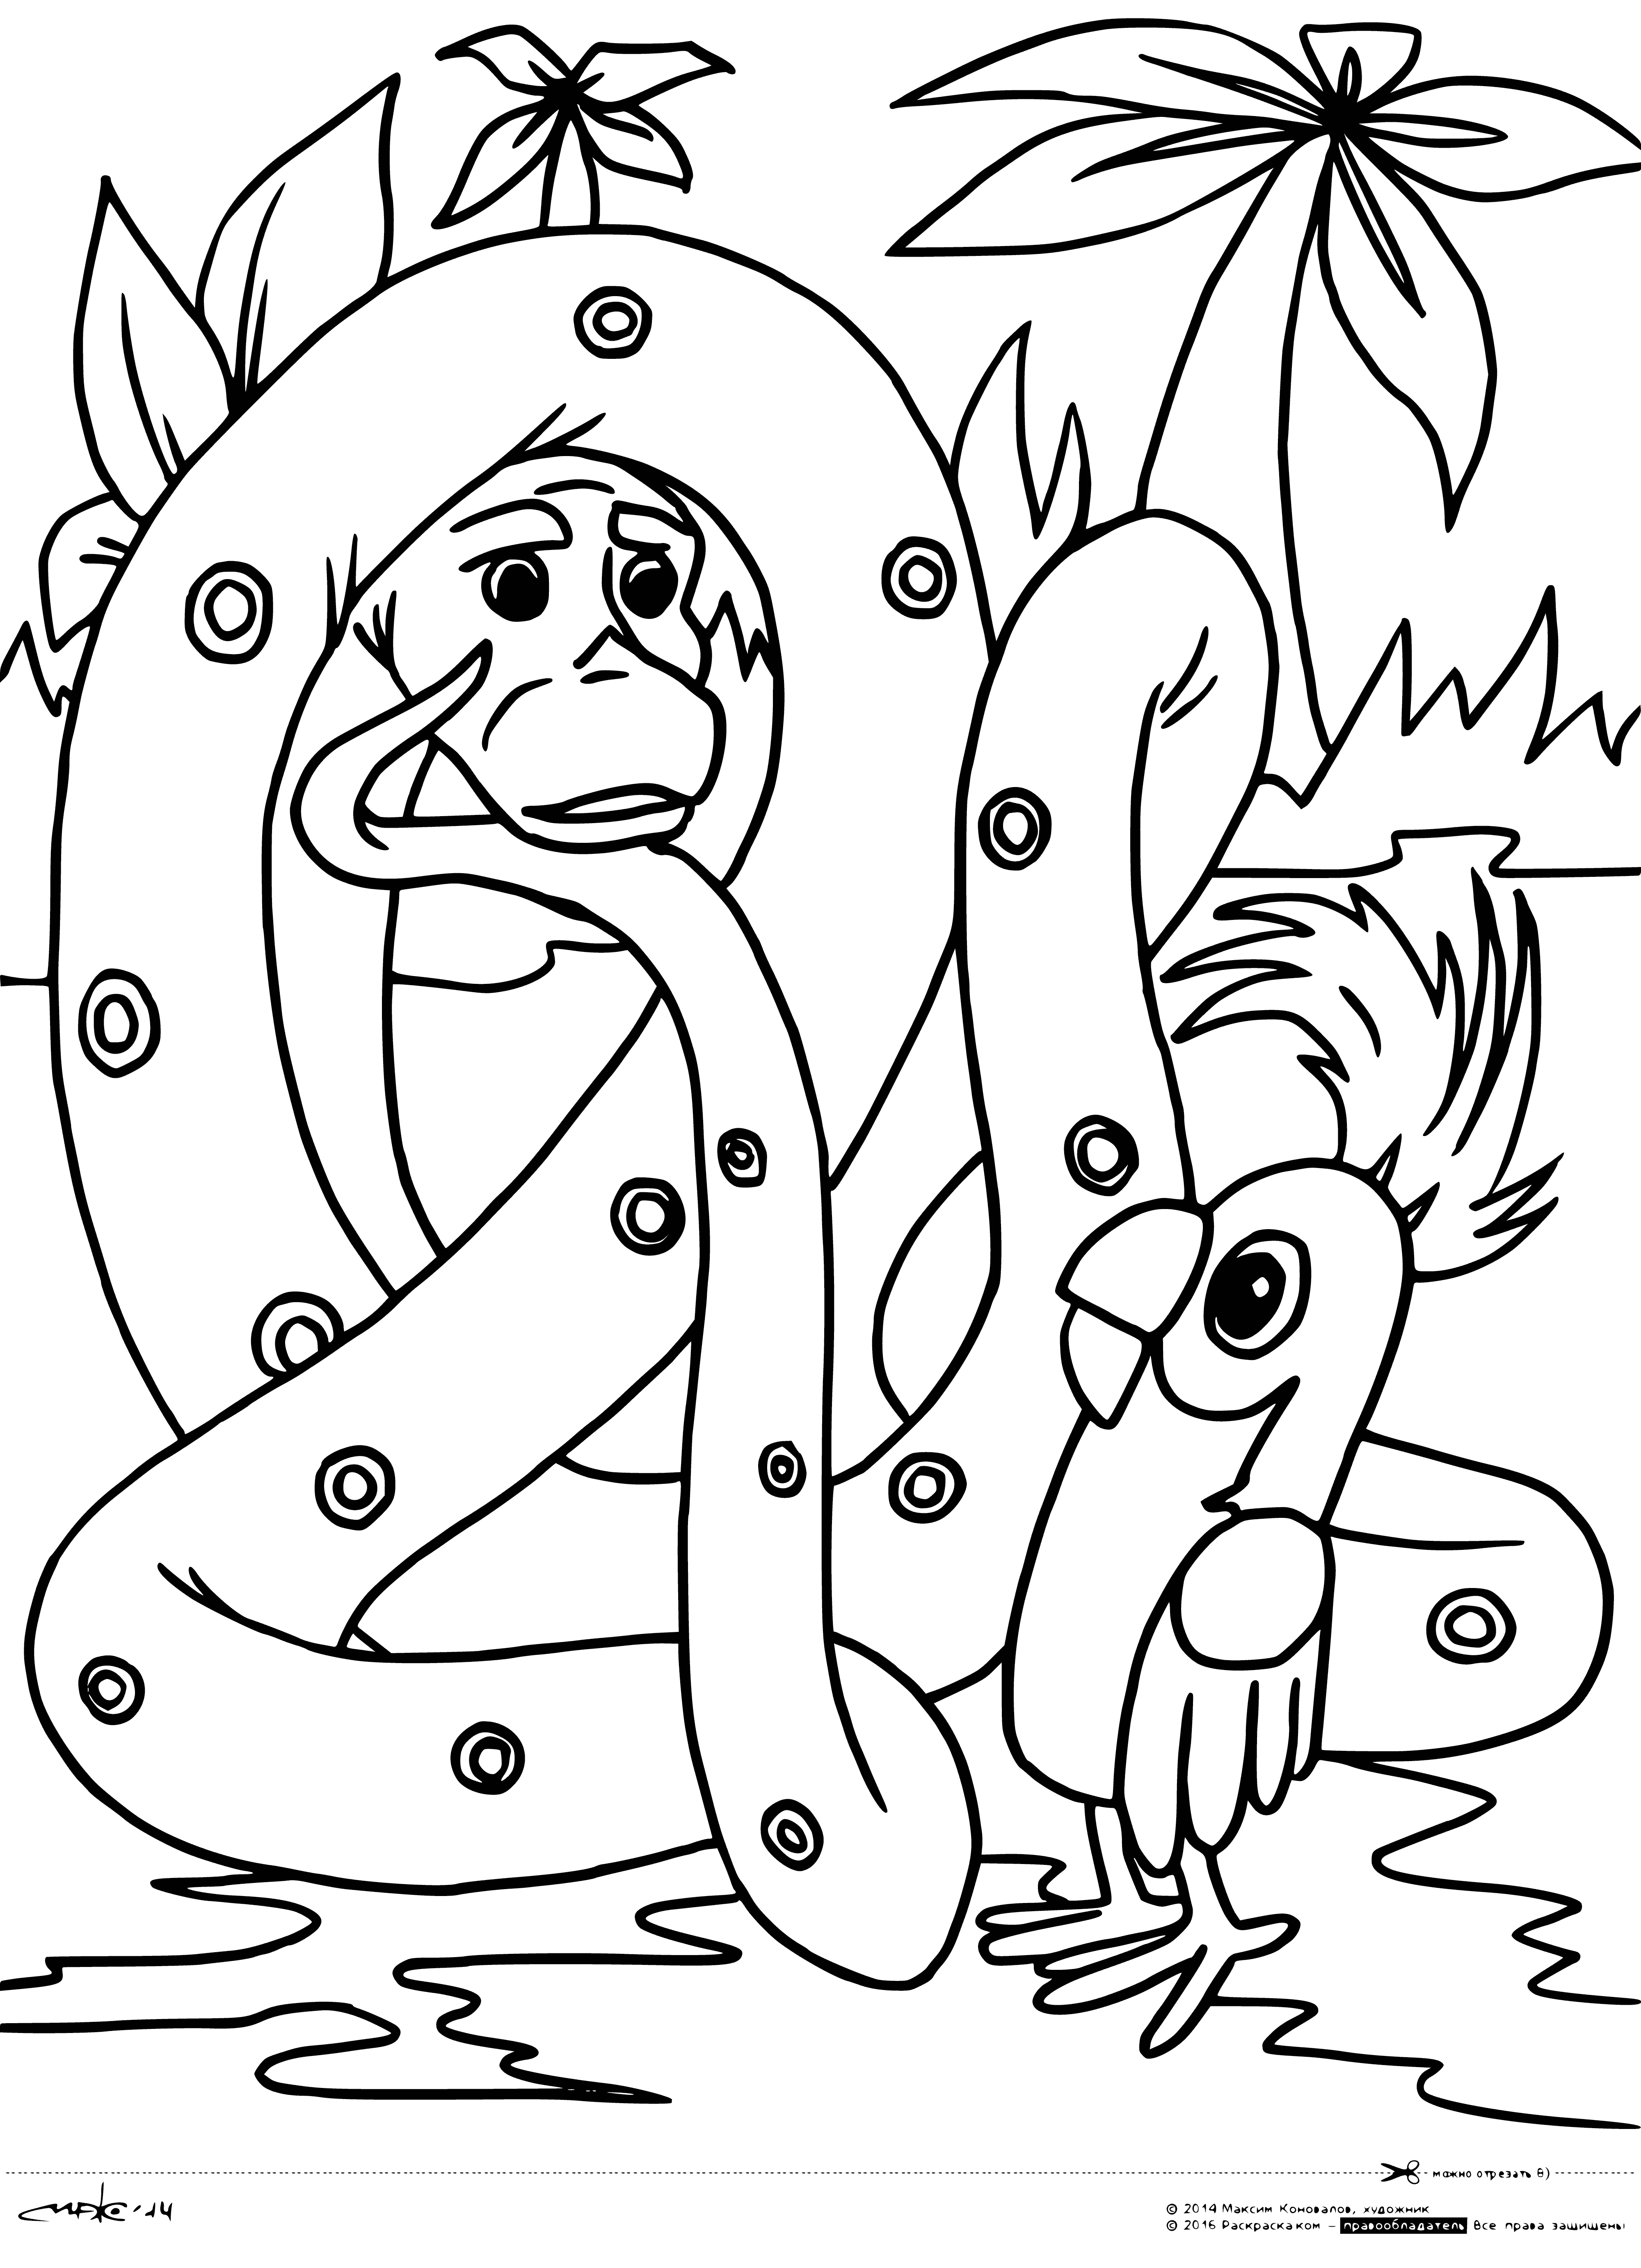 coloring page: Parrot trapped in boa constrictor's grip, beak agape.